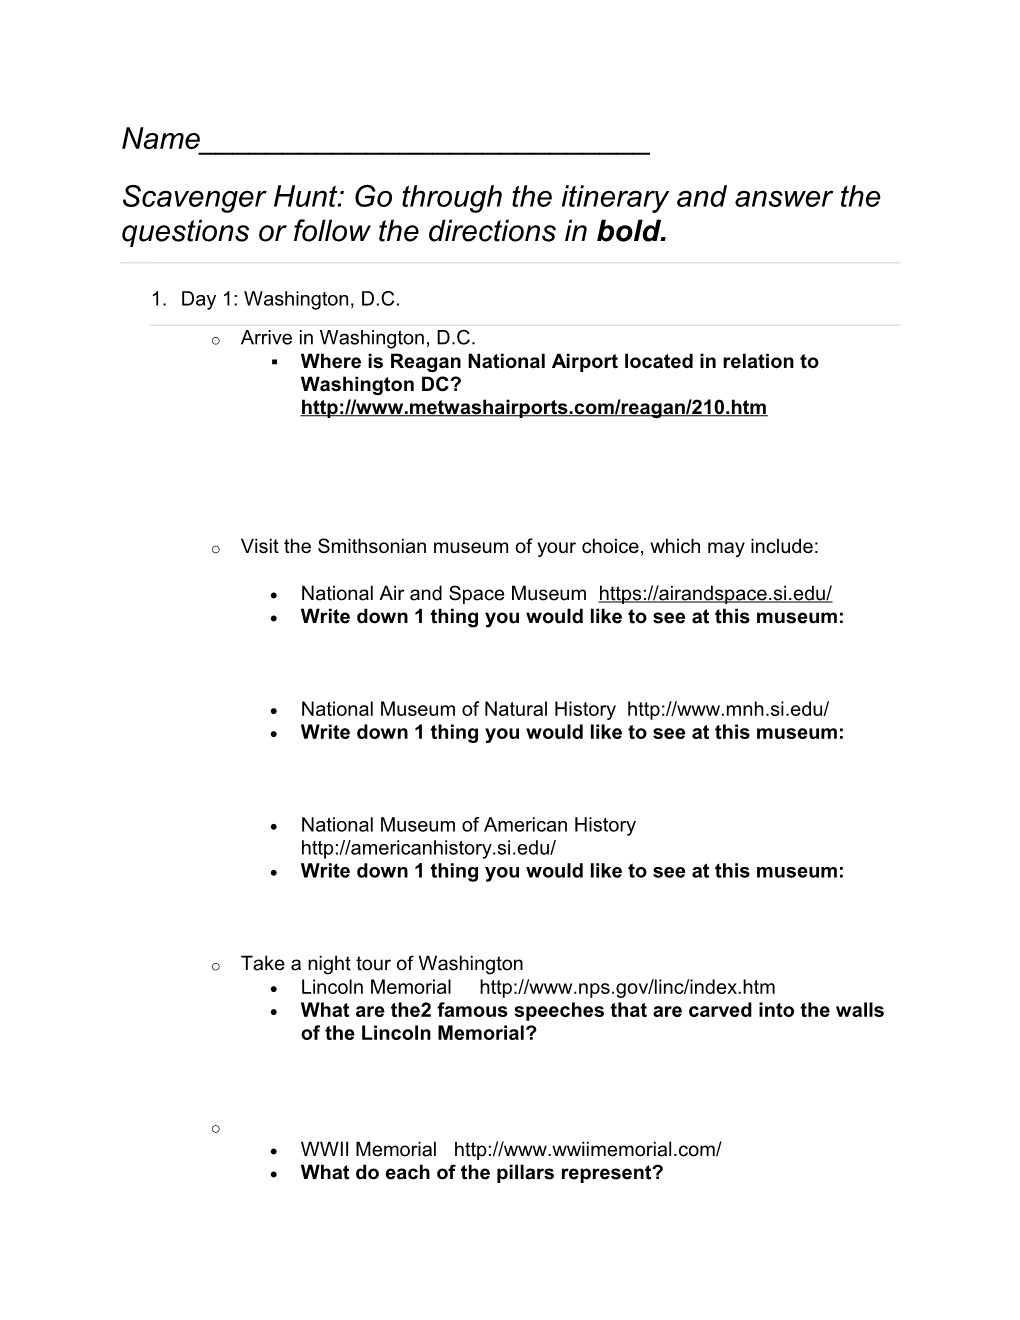 Scavenger Hunt: Go Through the Itinerary and Answer the Questions Or Follow the Directions